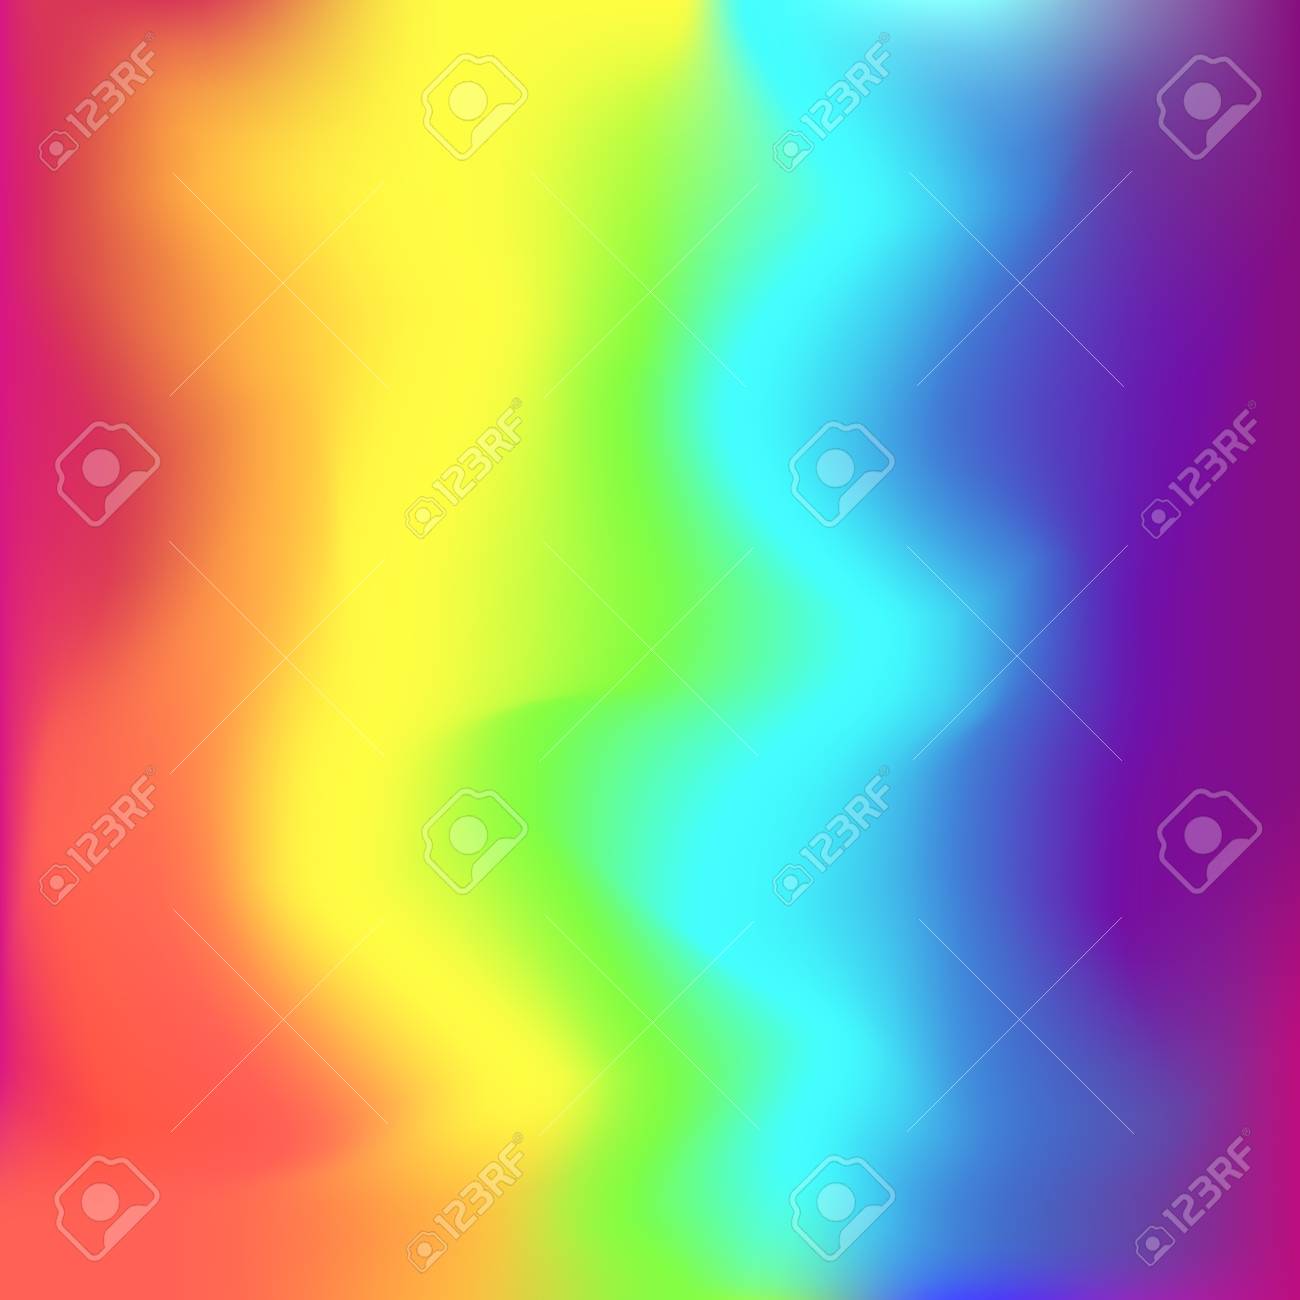 Bright Abstract Square Rainbow Mesh Gradient Background Nice